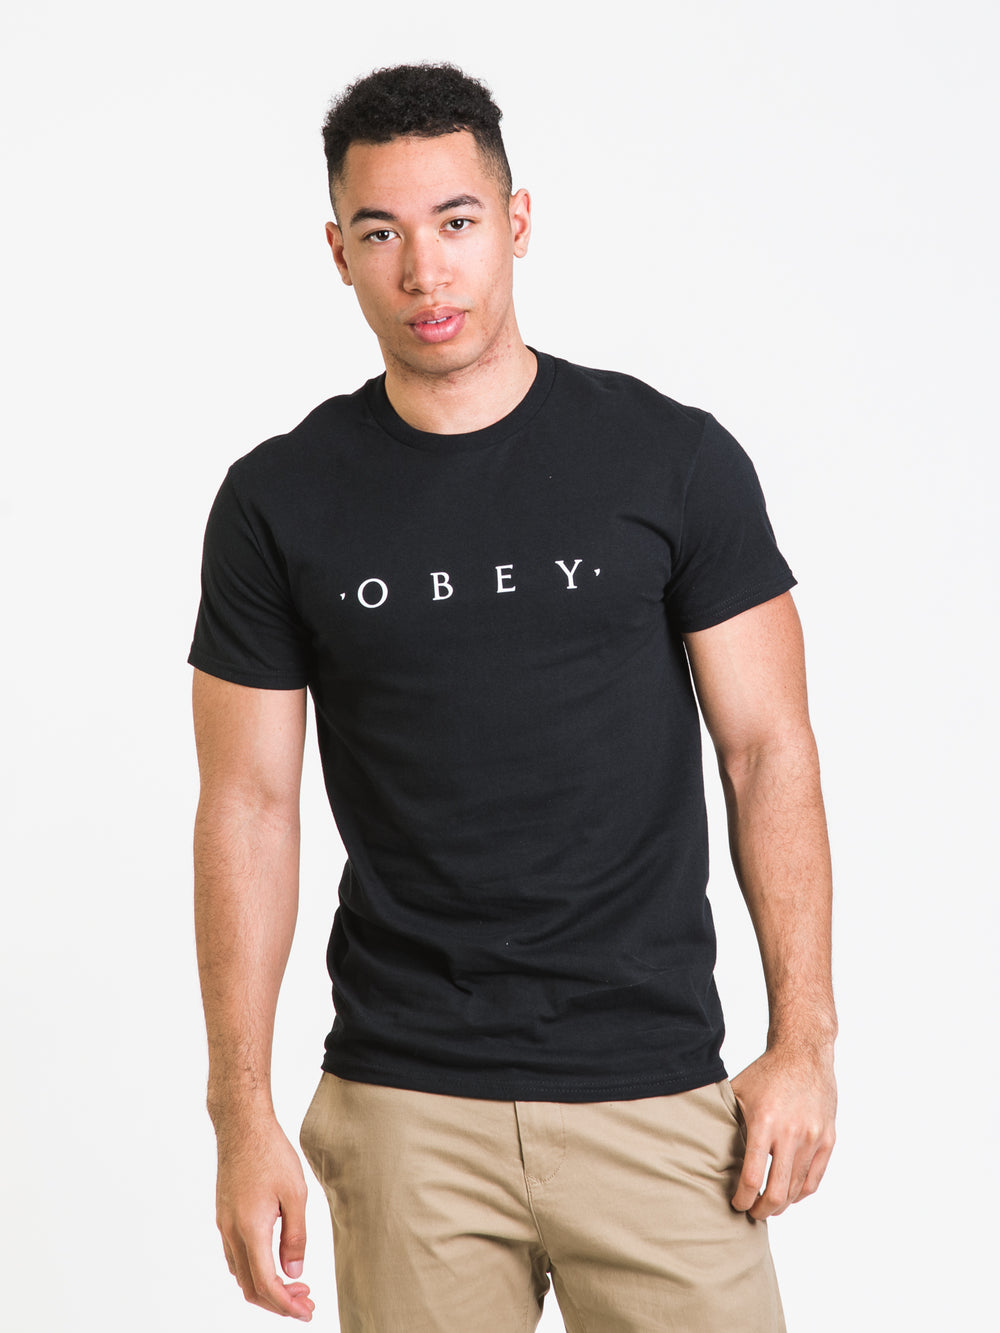 ETERNAL OBEY T-SHIRT - CLEARANCE